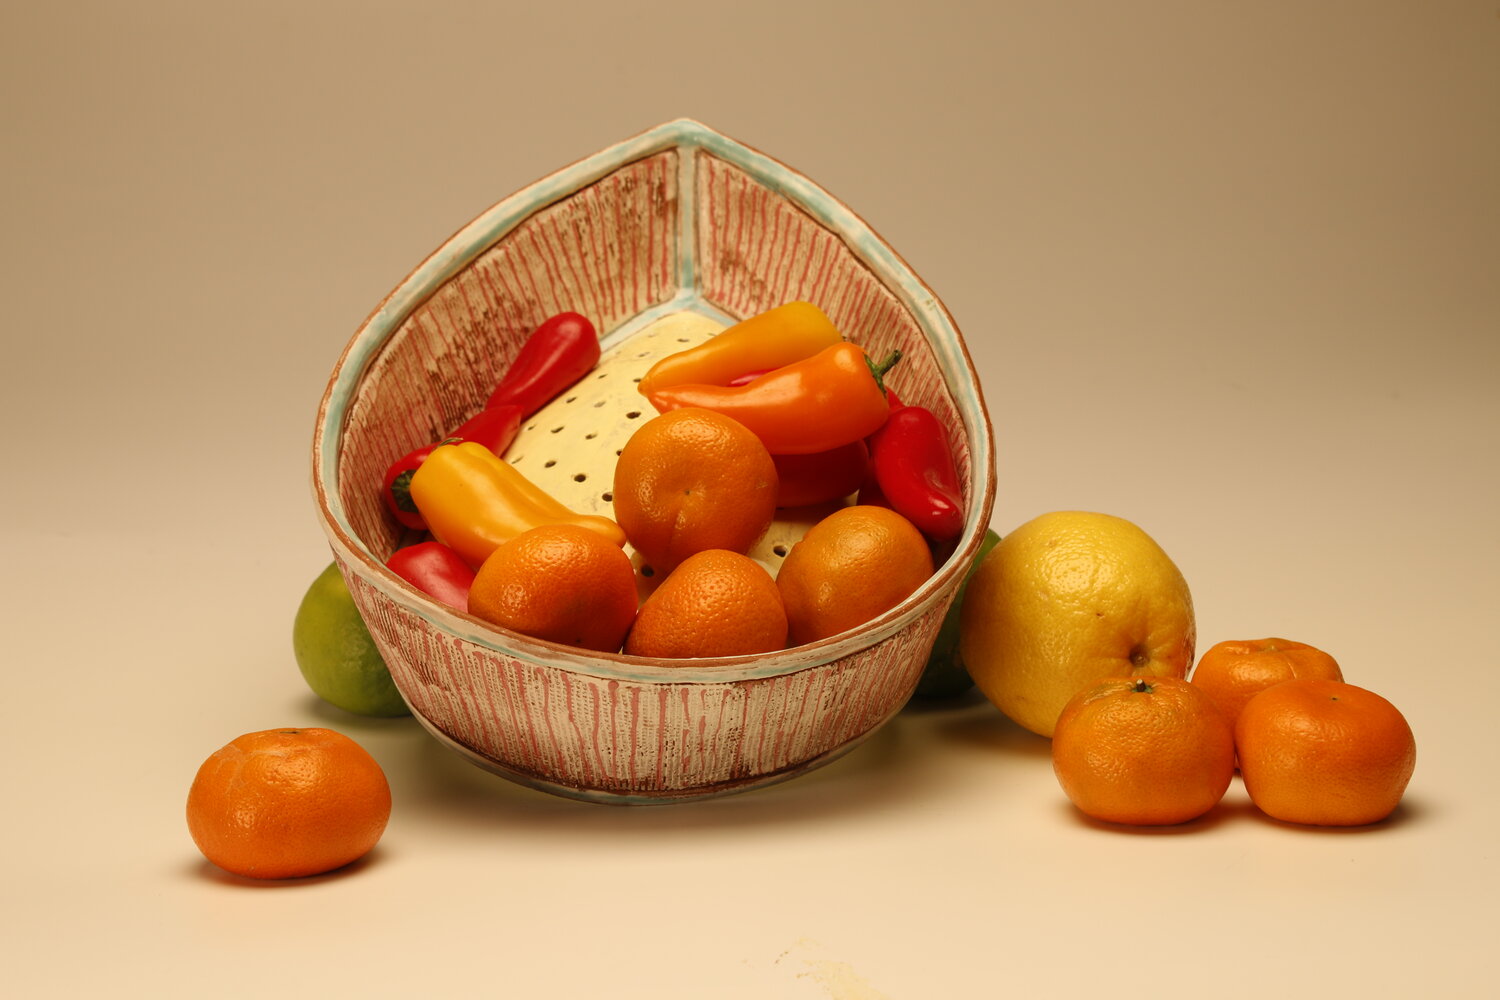 An almond shaped ceramic colander filled with fruit, image courtesy of the artist